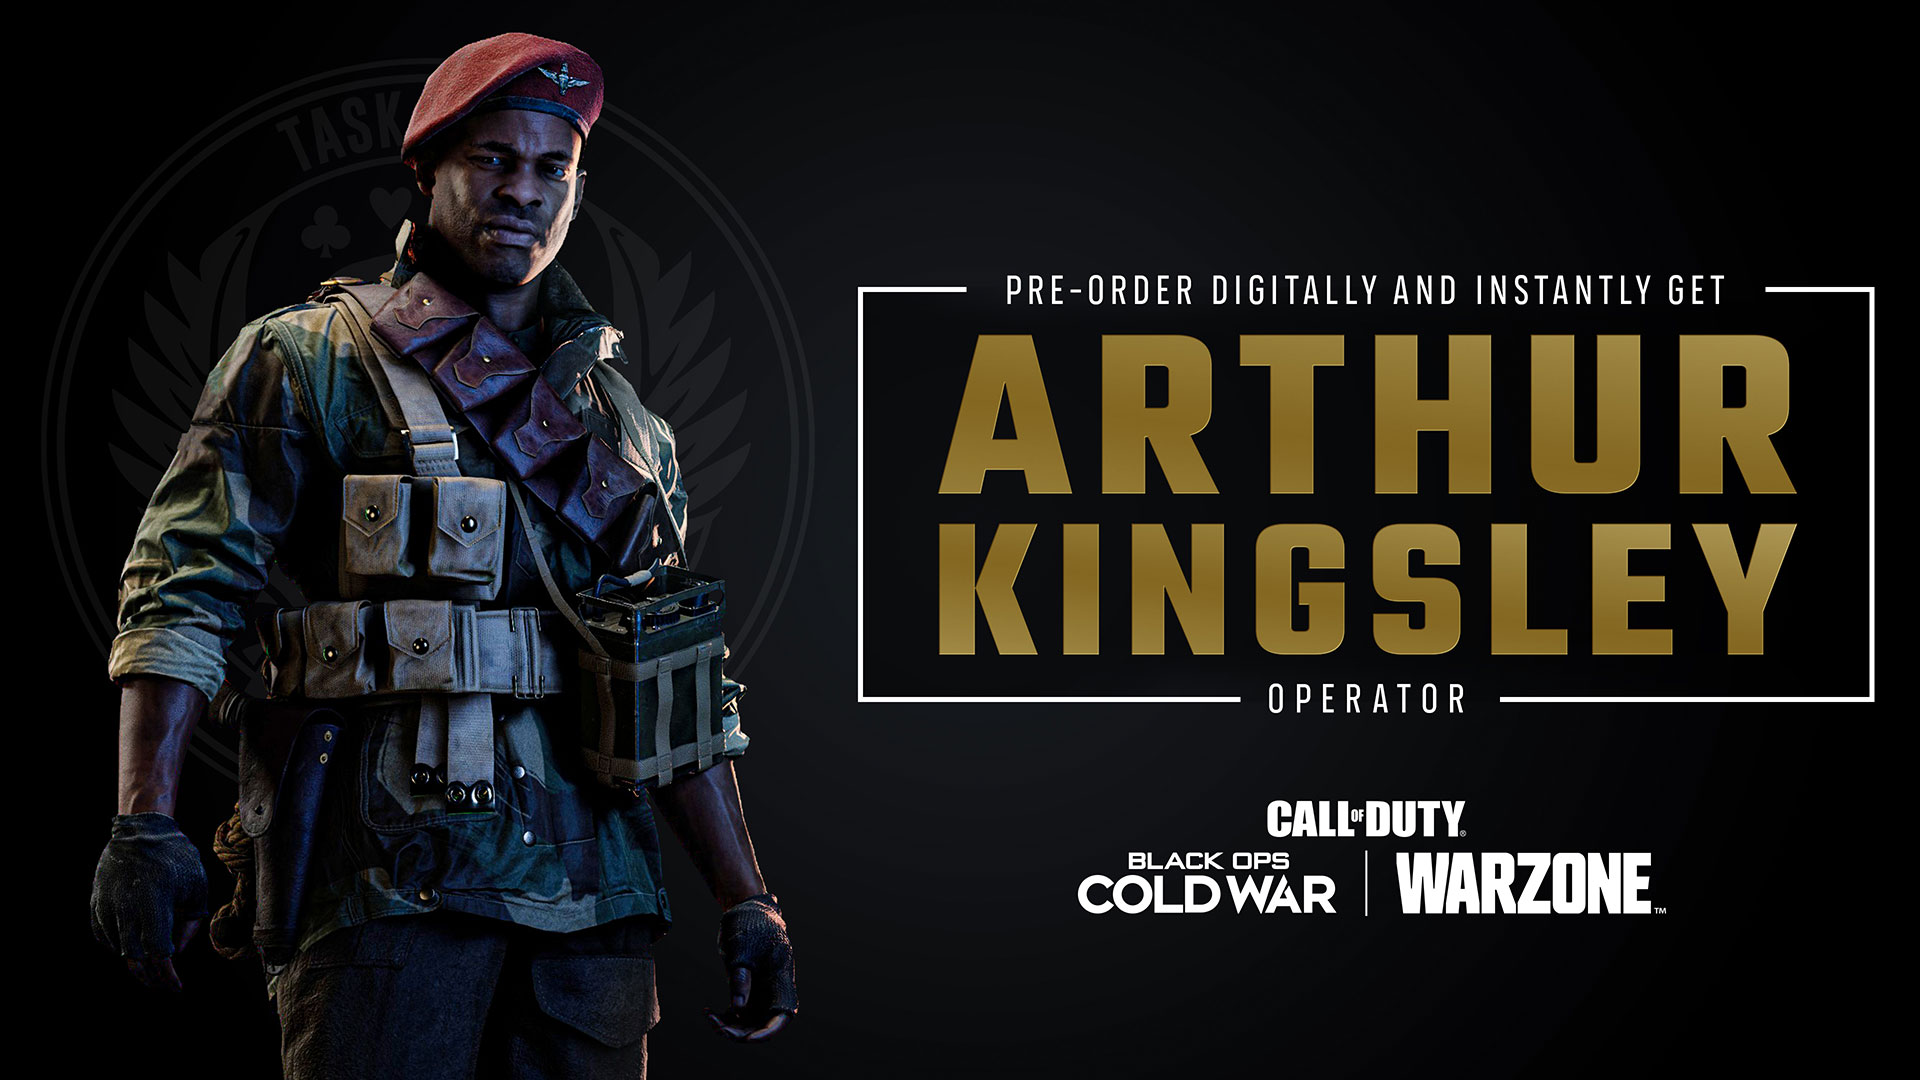 Play Vanguard’s Arthur Kingsley now in Black Ops Cold War and Warzone with digital pre-purchase of Call of Duty: Vanguard